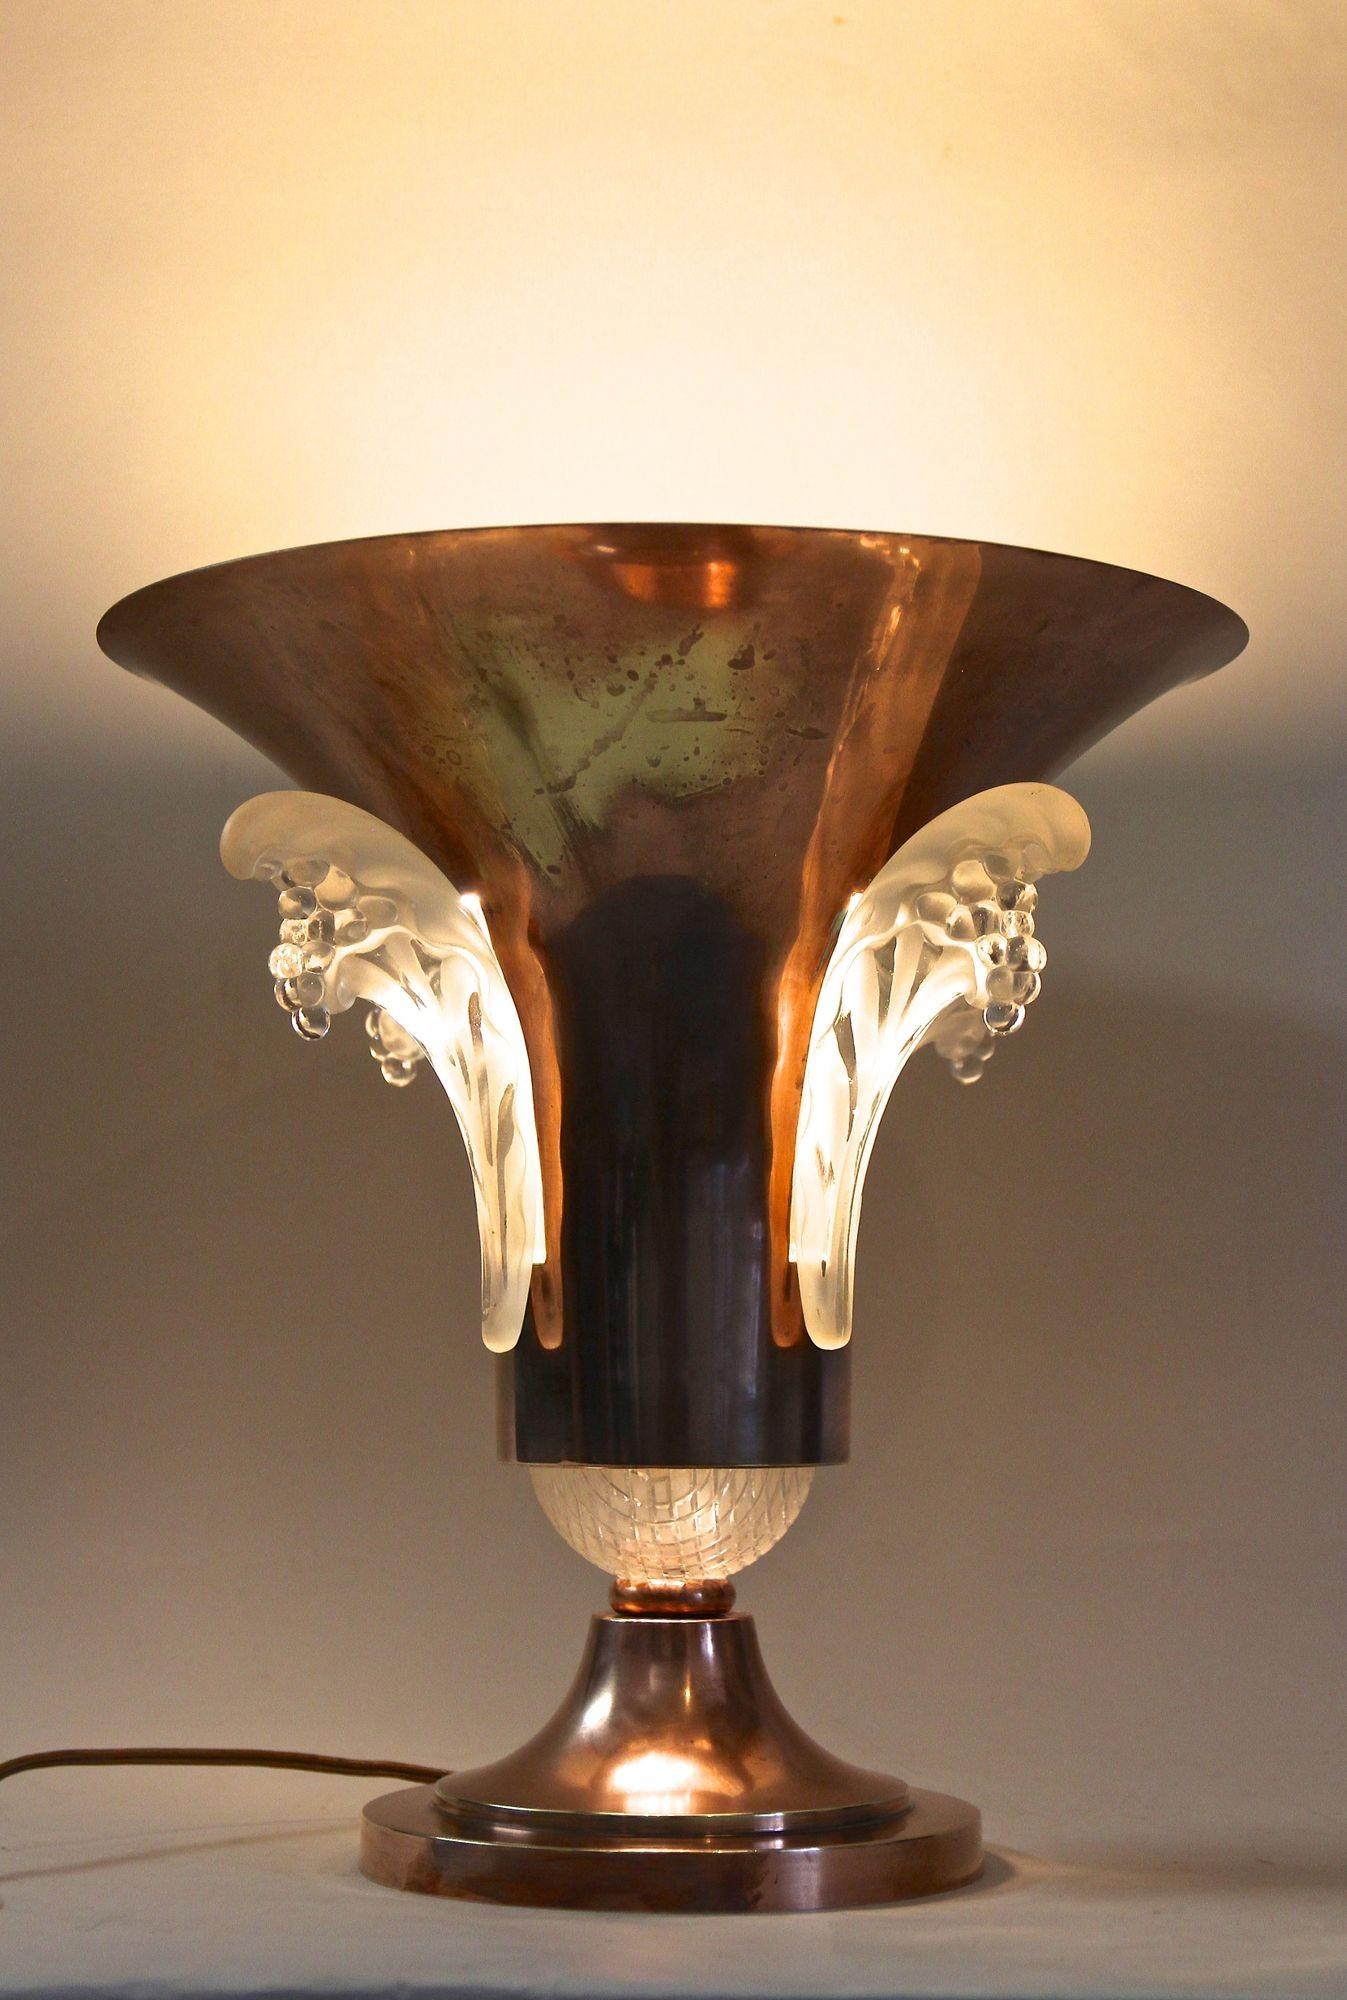 Art Deco Copper Table Lamp with Lalique Glass Elements, France, circa 1925 For Sale 12